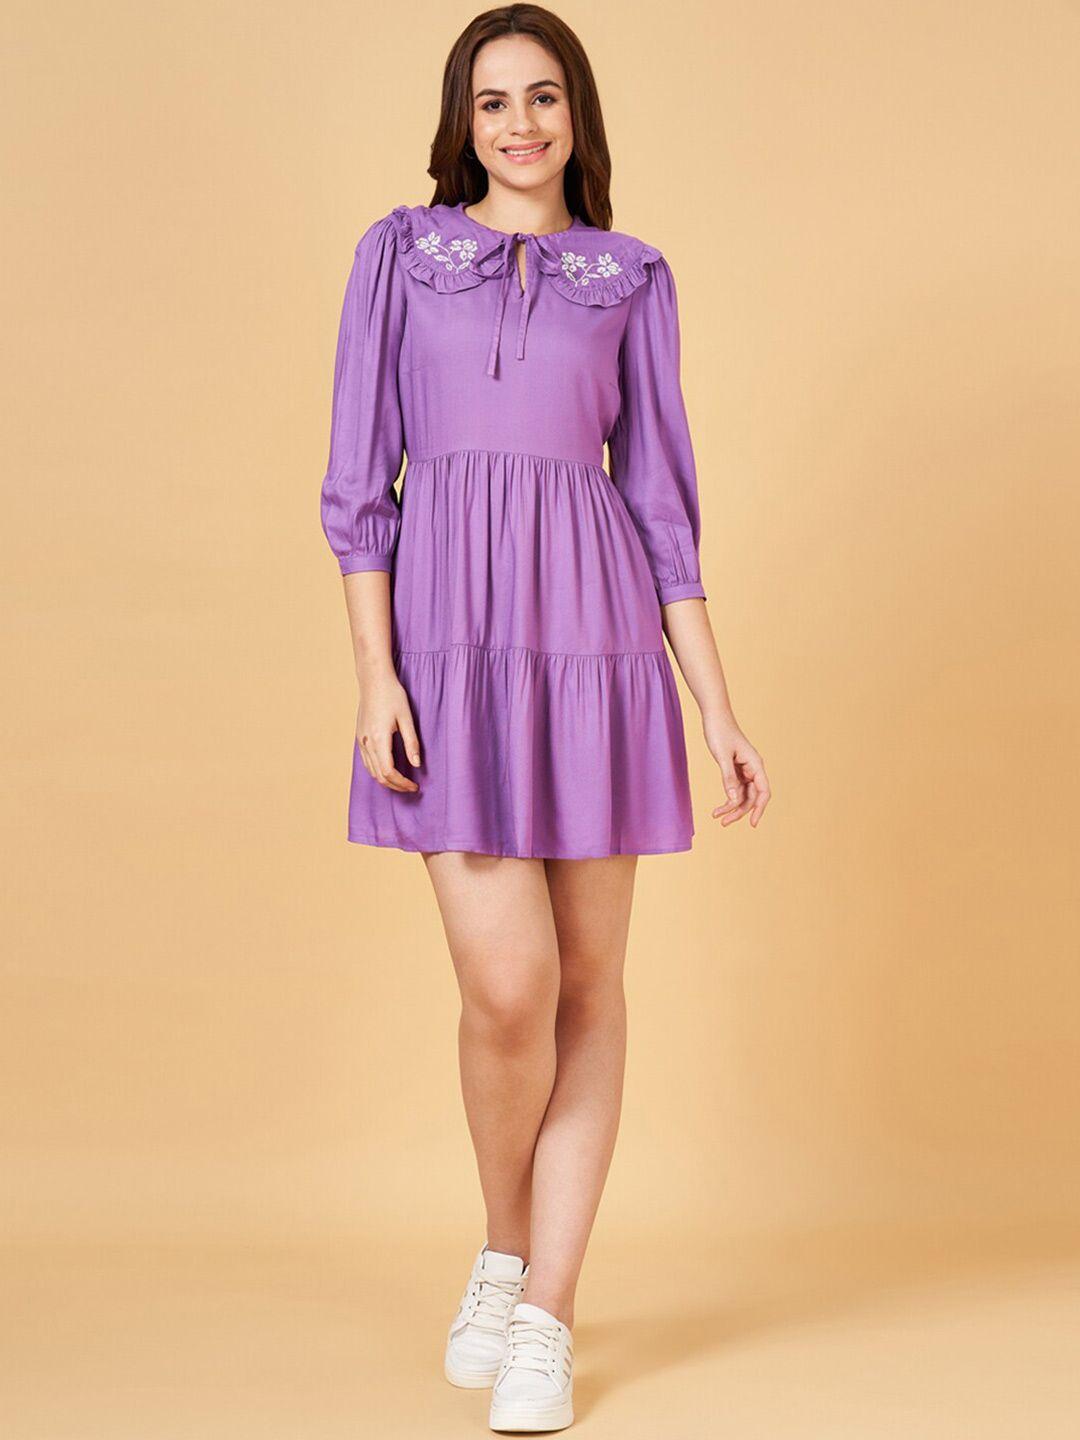 honey-by-pantaloons-peter-pan-collar-puff-sleeves-ruffled-tiered-fit-&-flare-dress